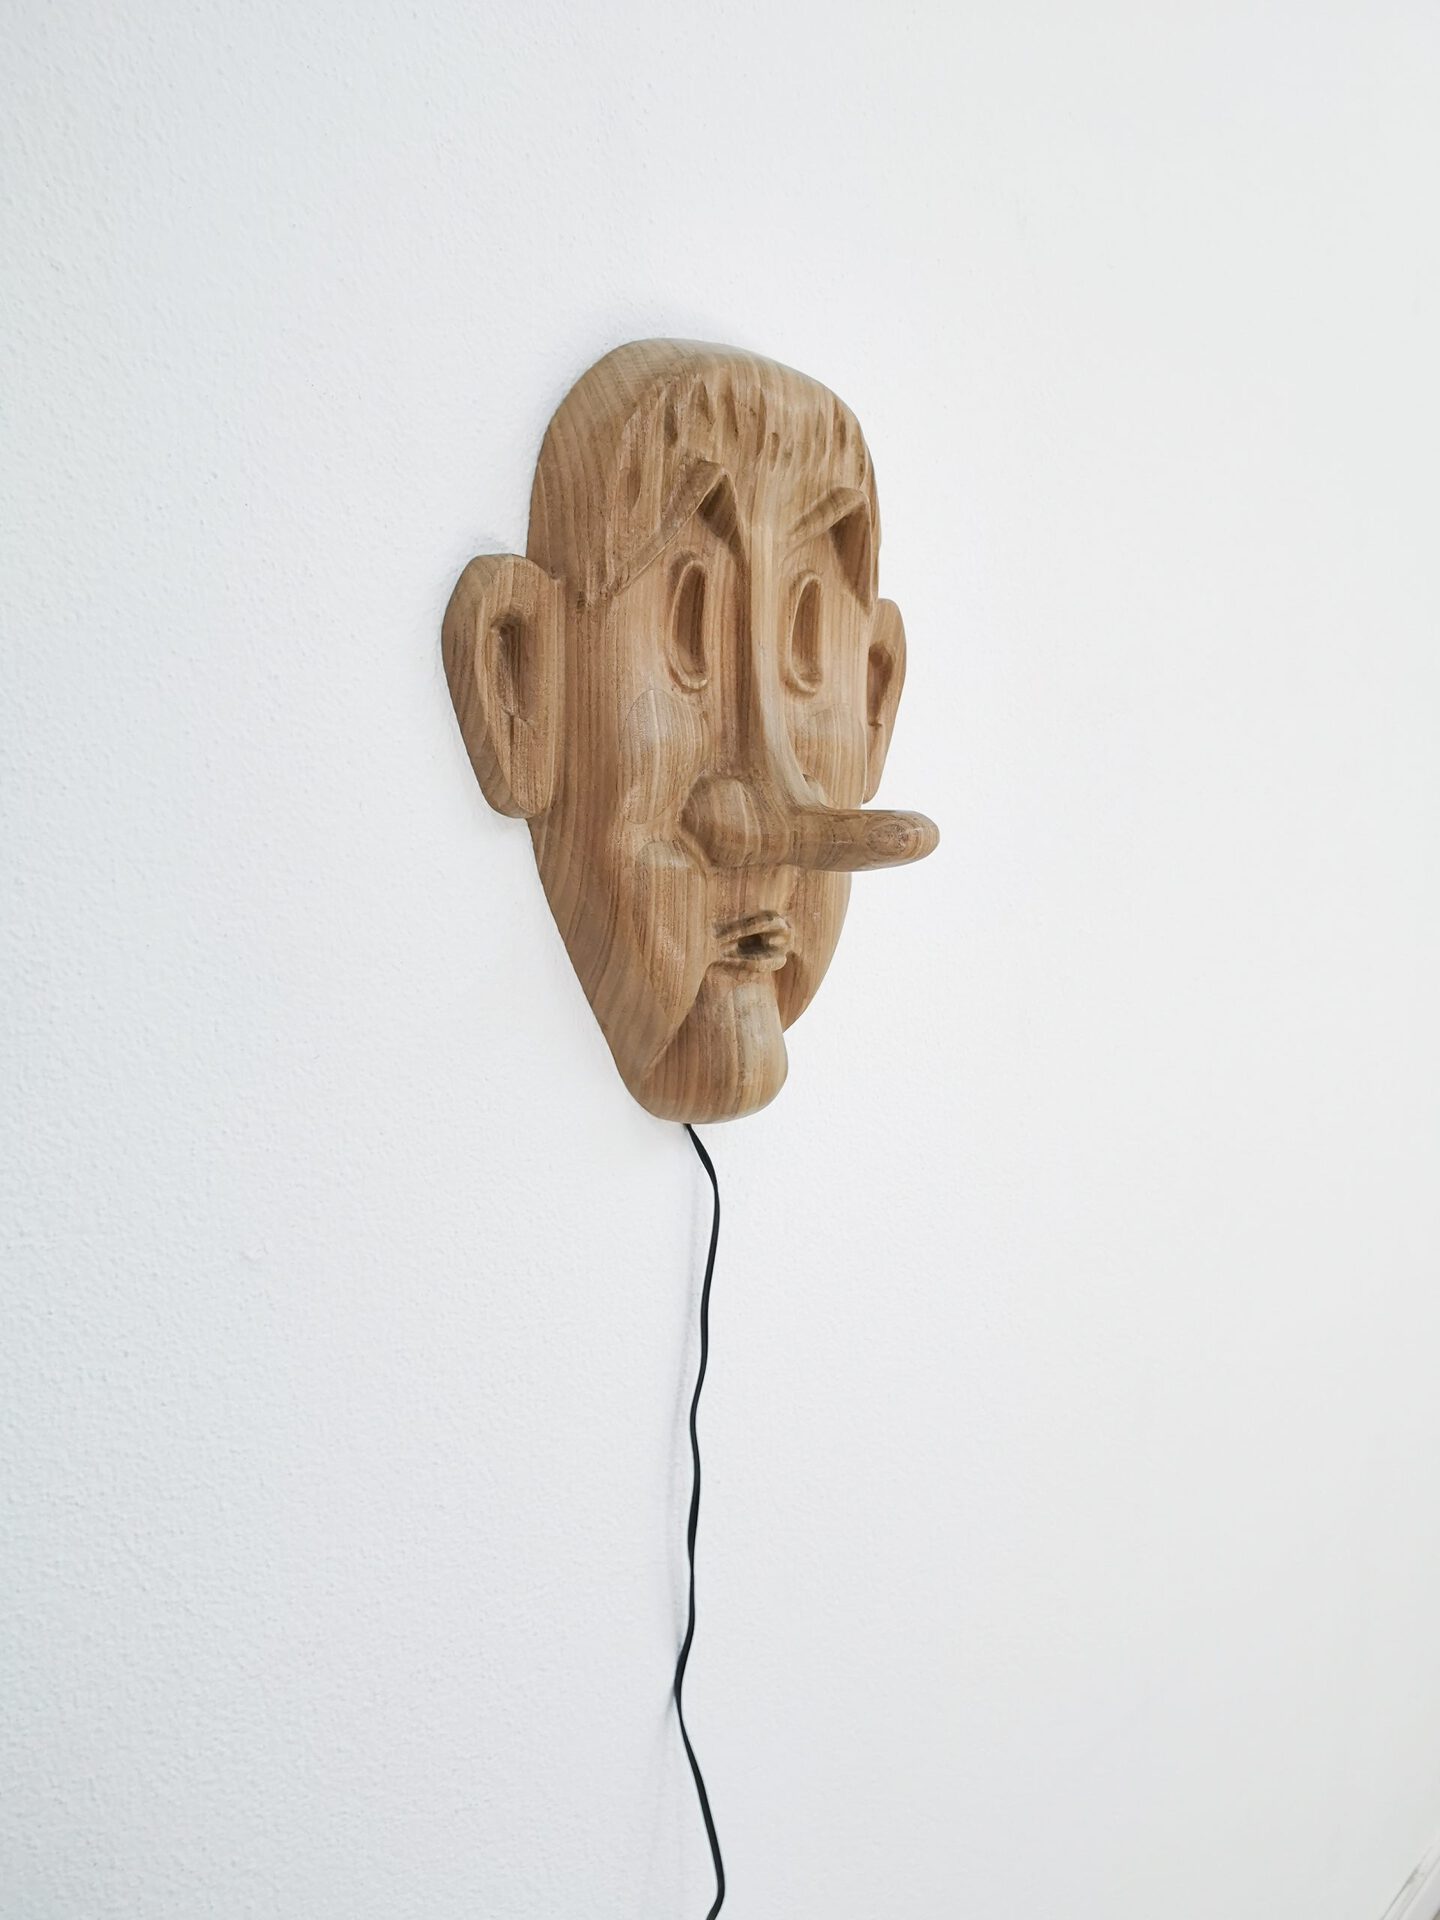 Francesco De Bernardi , Detail,  “Untitled (FIU FIU)” Solid afromosia wood,
loudspeakers, electronic
electronic components, MP3, whistle in loop, 
36,5 x 41 x 13 cm, 2022